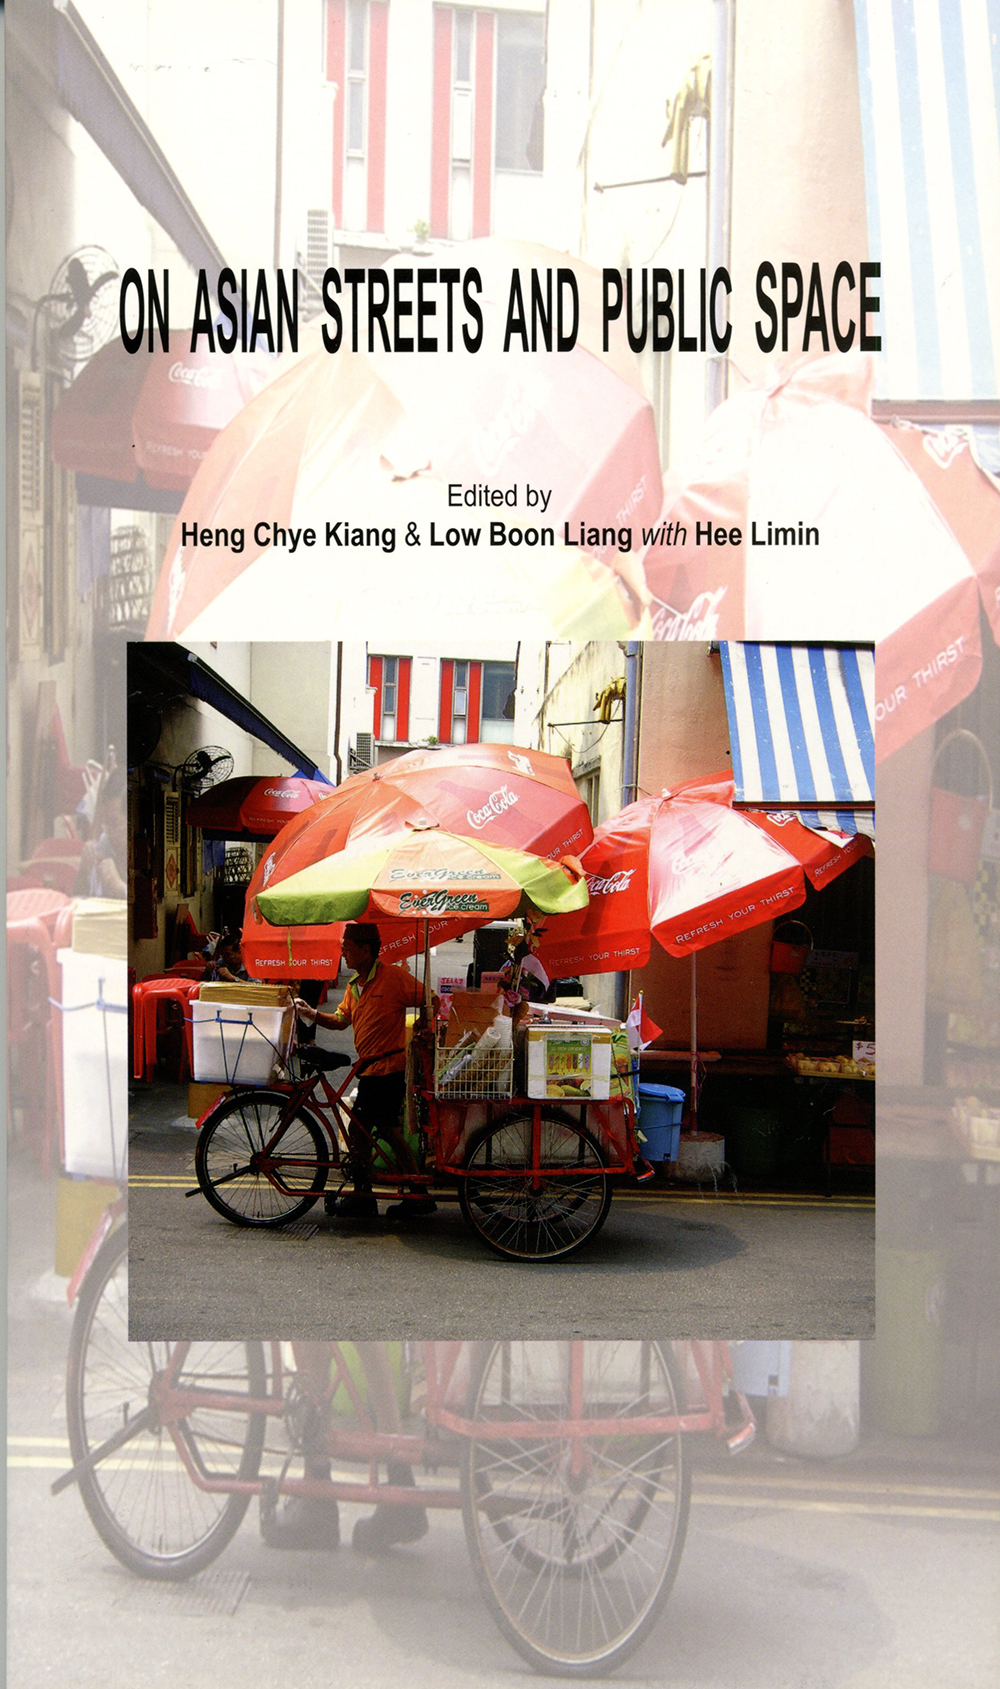 On Asian Streets and Public Space  Selected Eassays from Great Asian Streets Symposiums (GASS) 1 and 2